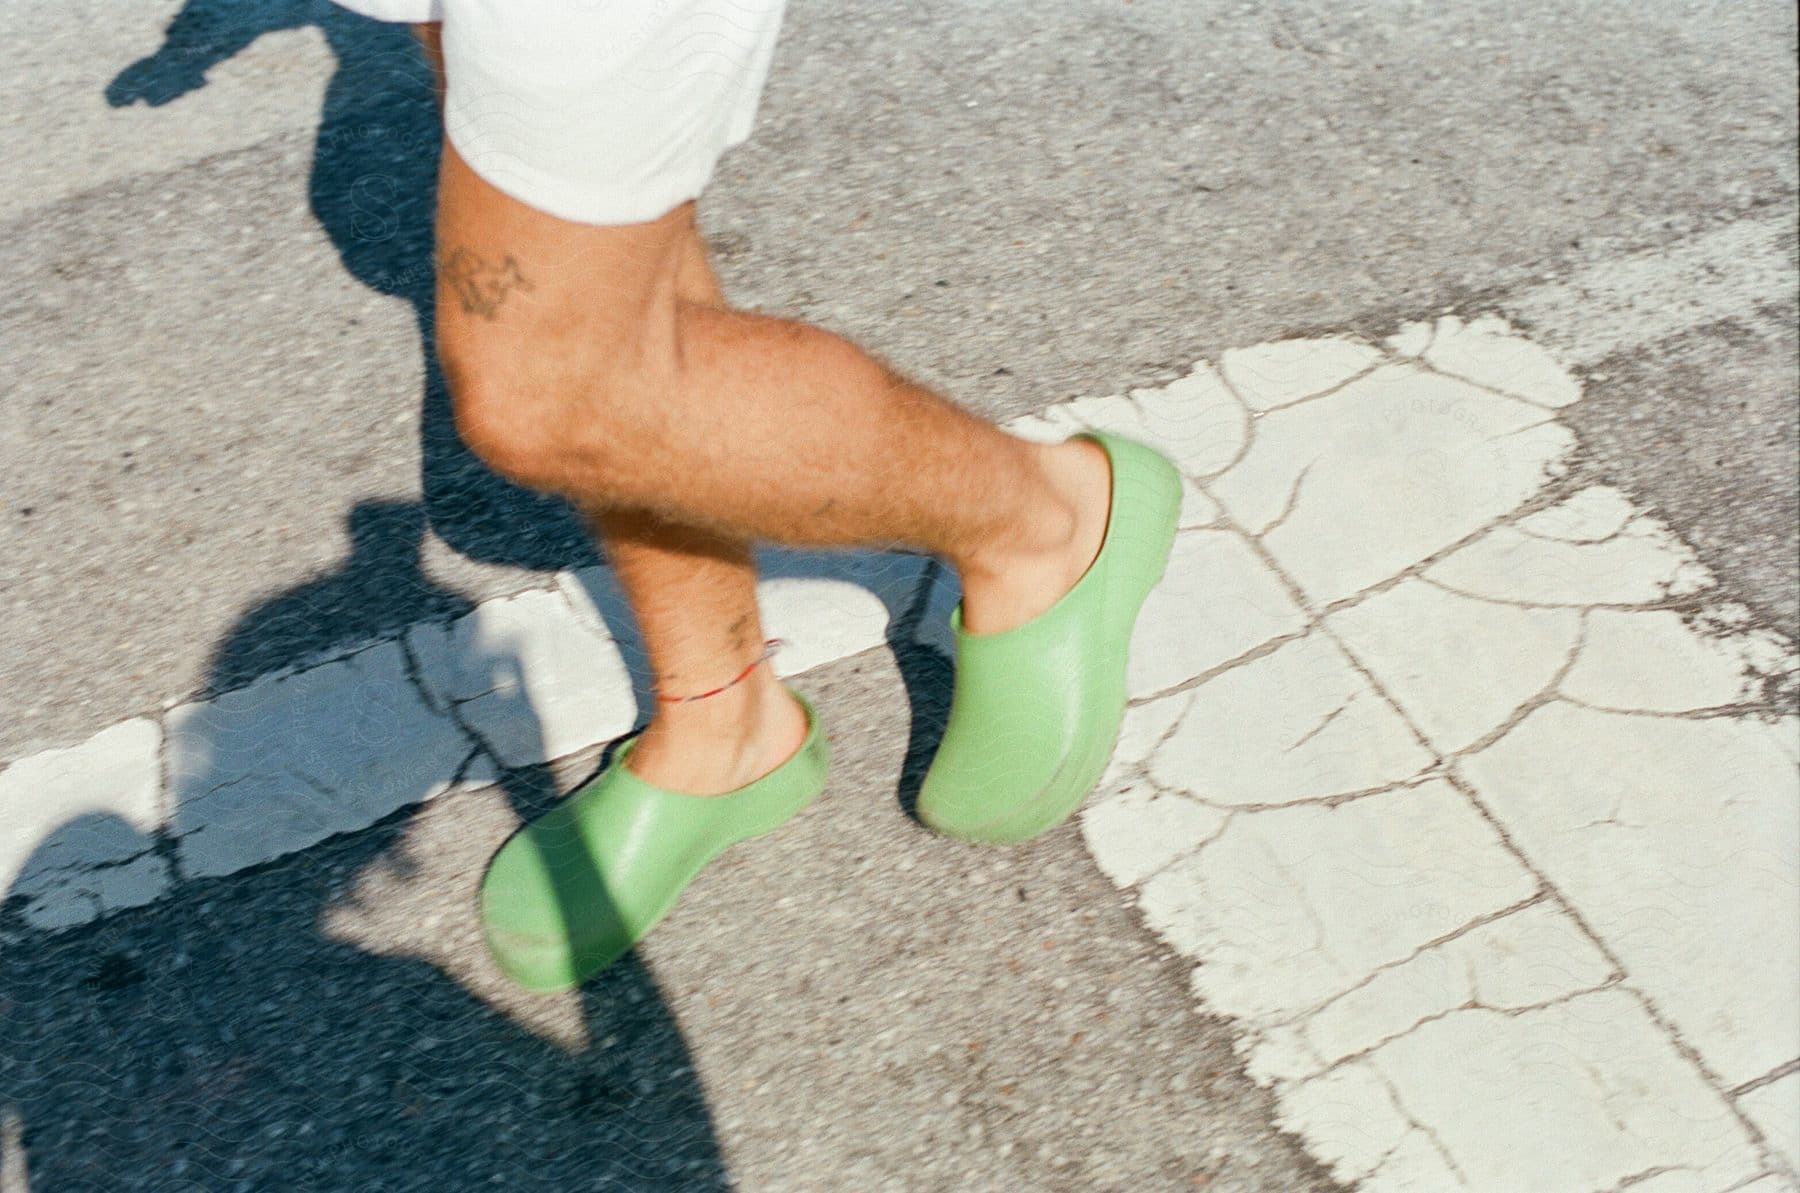 A person is walking on a street wearing green shoes with white markings on the ground